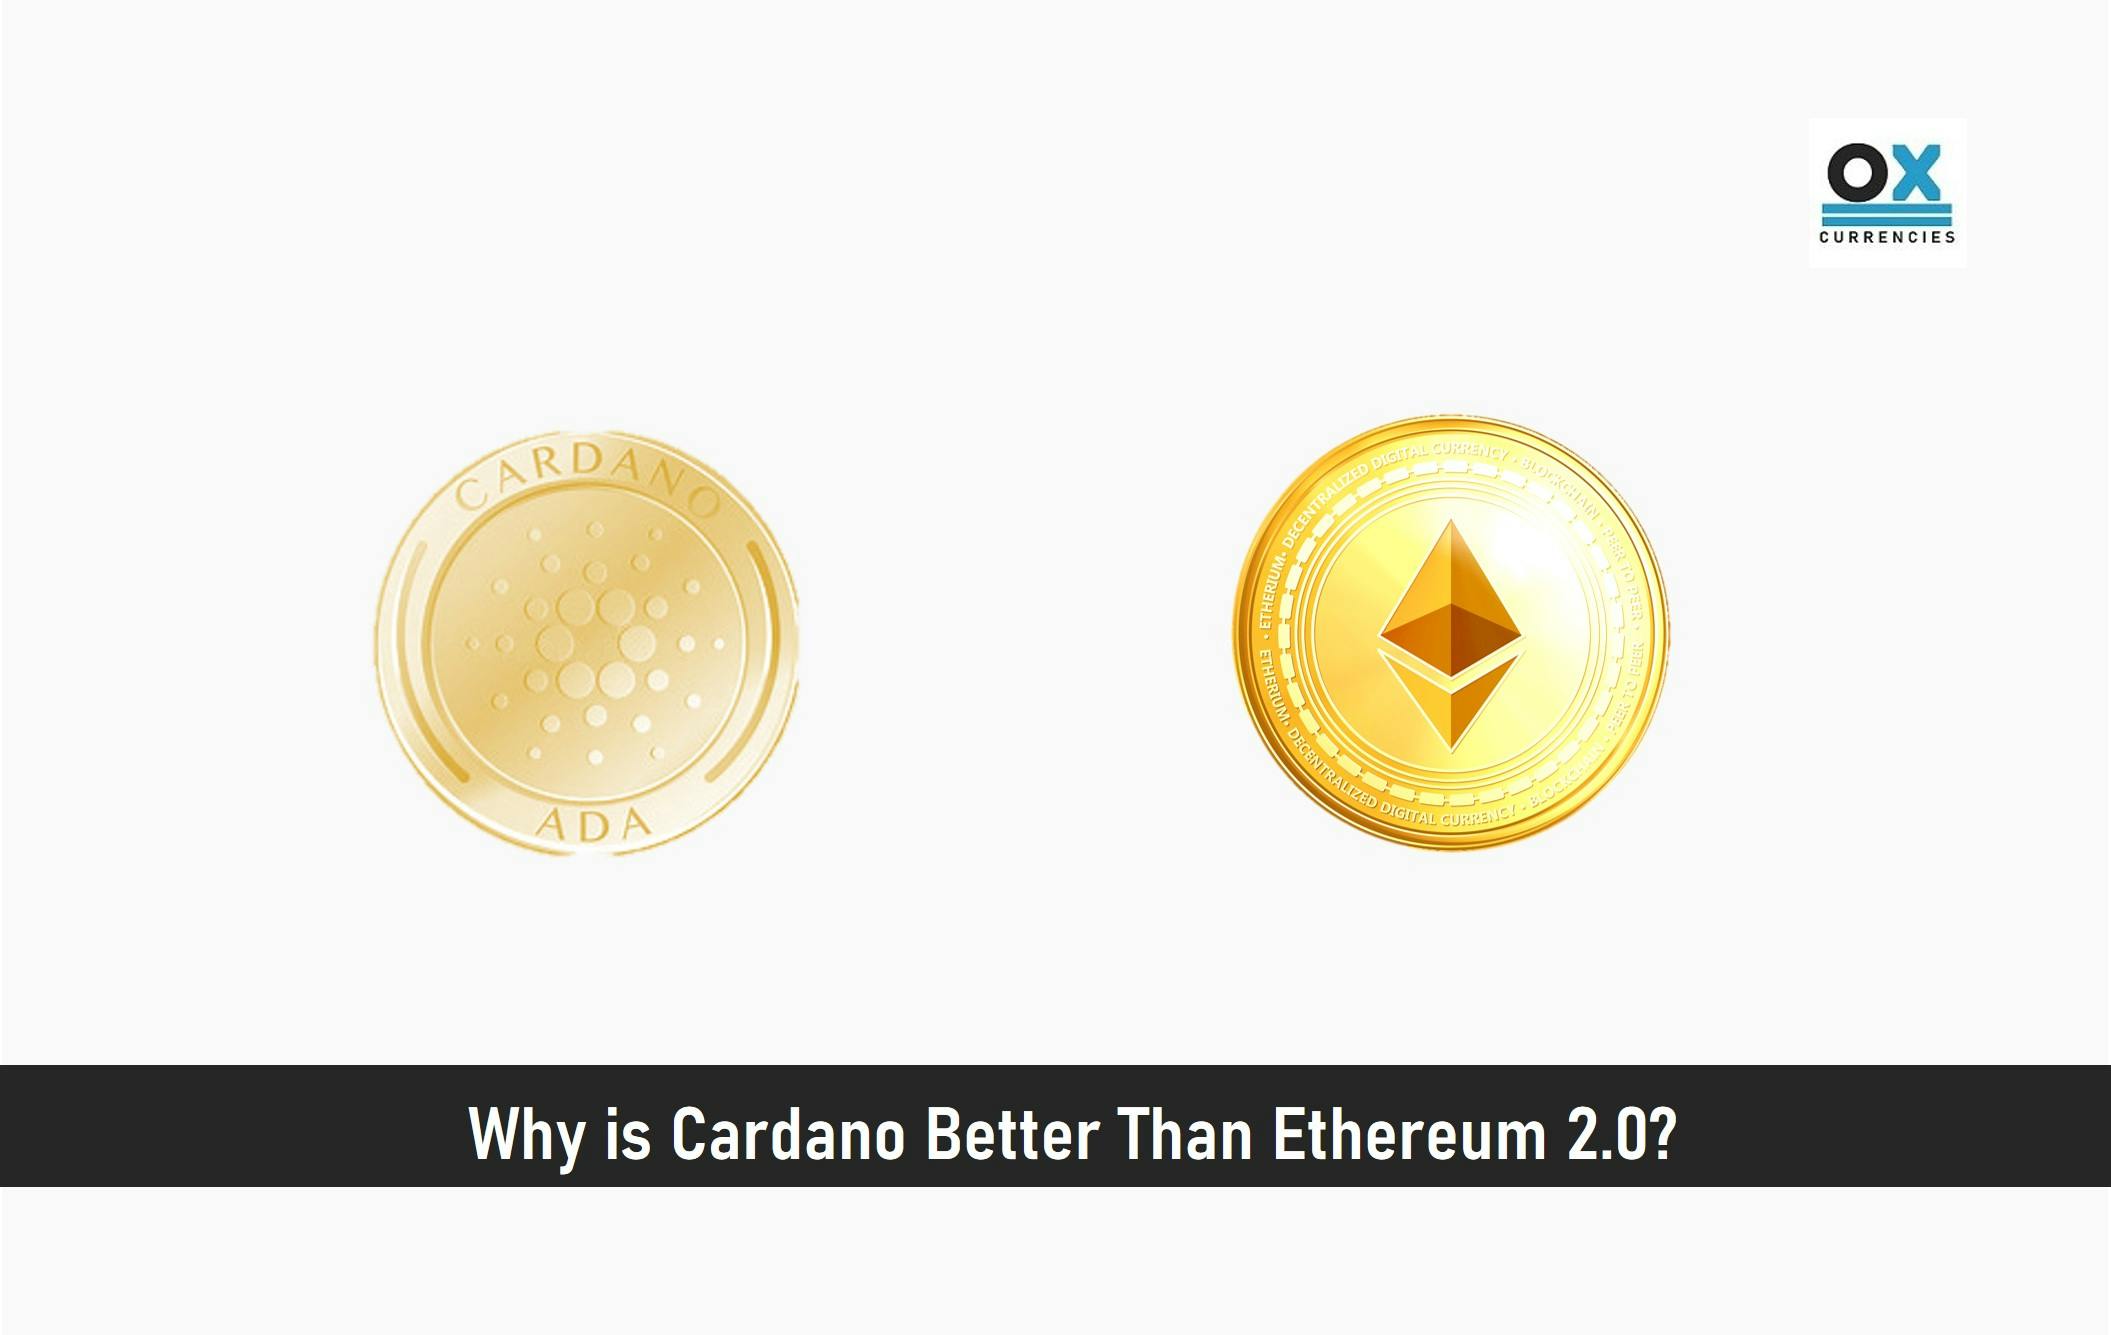 Why is Cardano Better Than Ethereum 2.0?